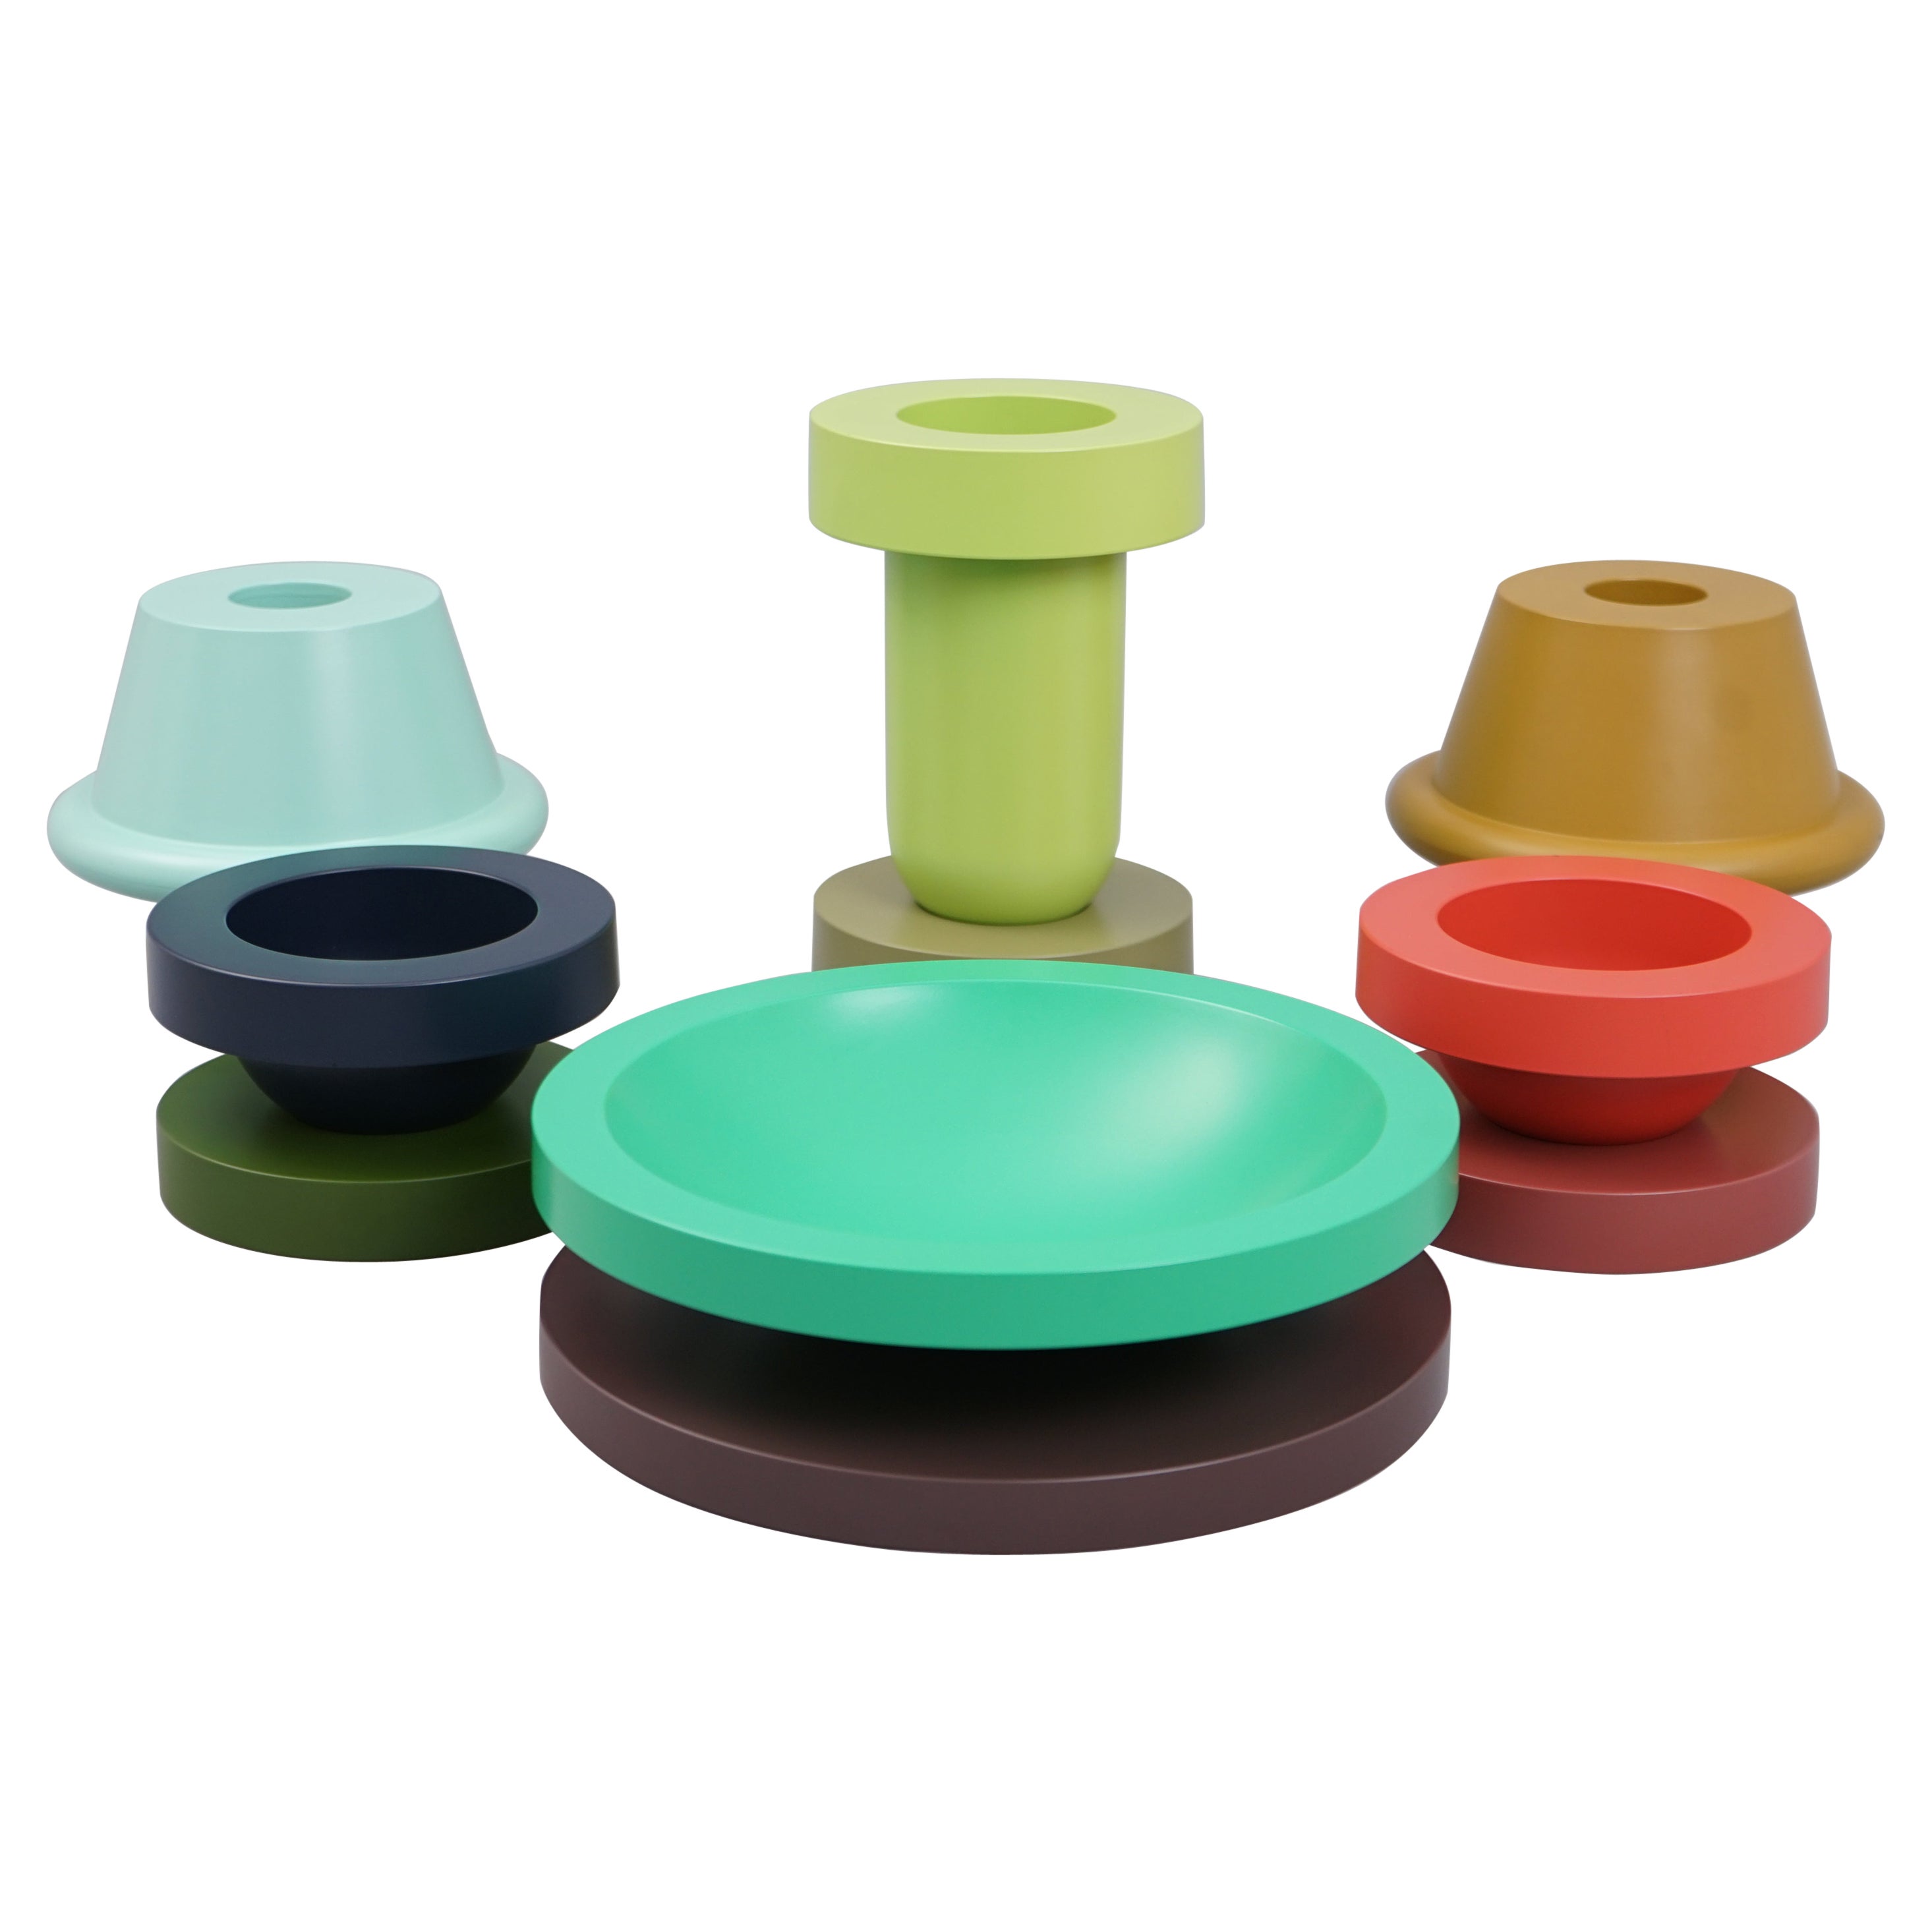 Vases Bowls by Ettore Sottsass for Marutomi, 1990s Set of 6